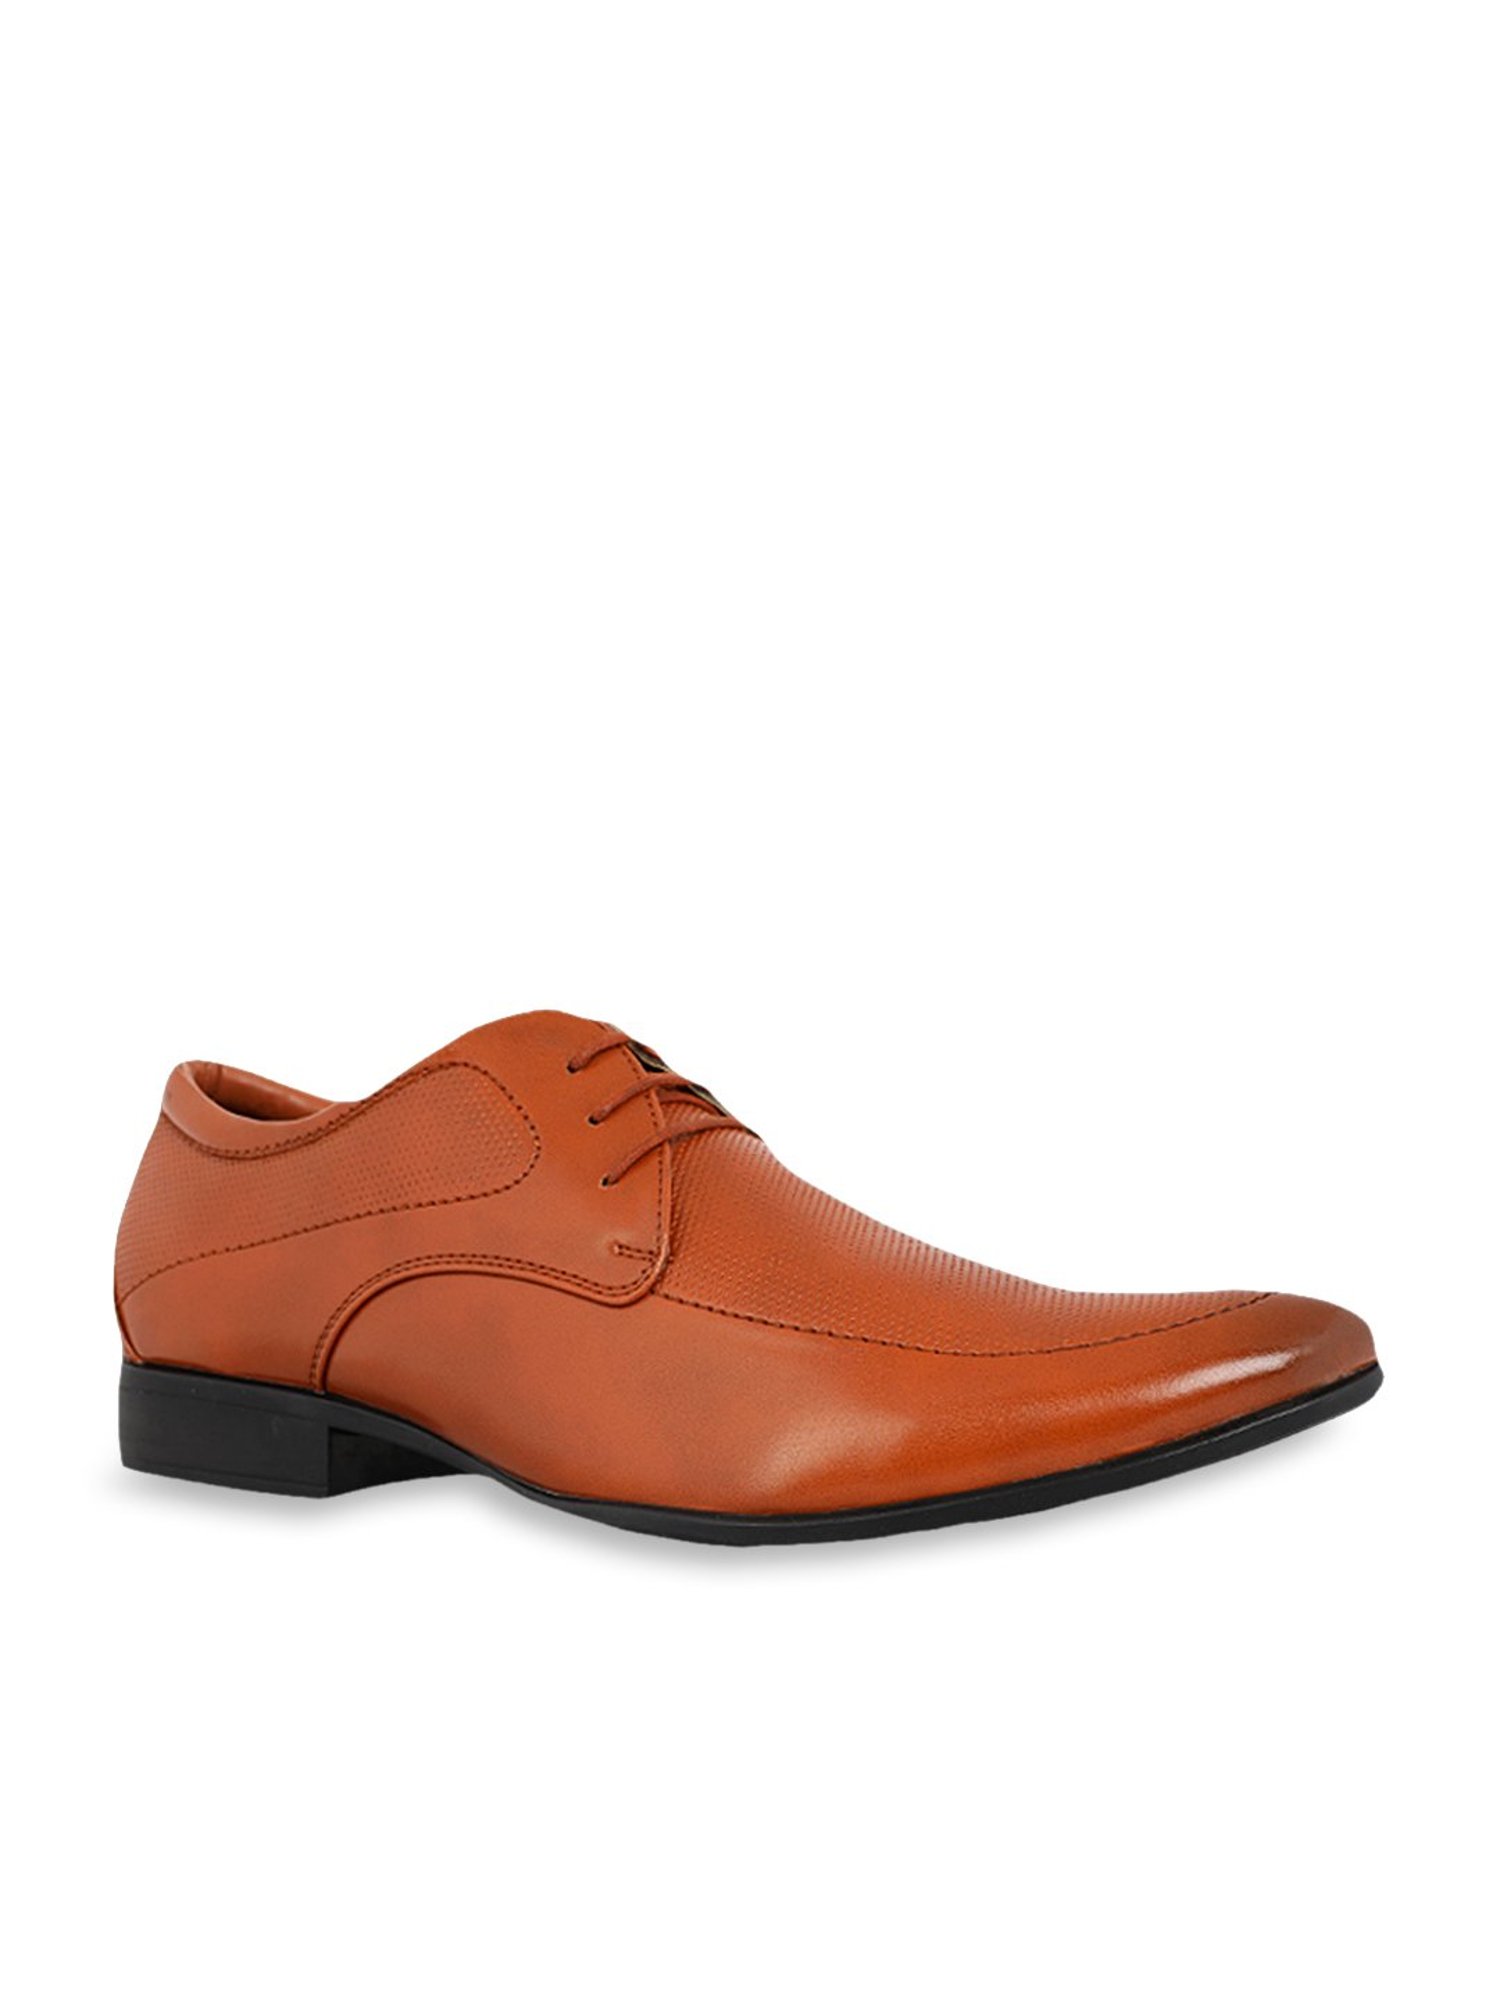 Bata Tan Derby Shoes from Bata at best 